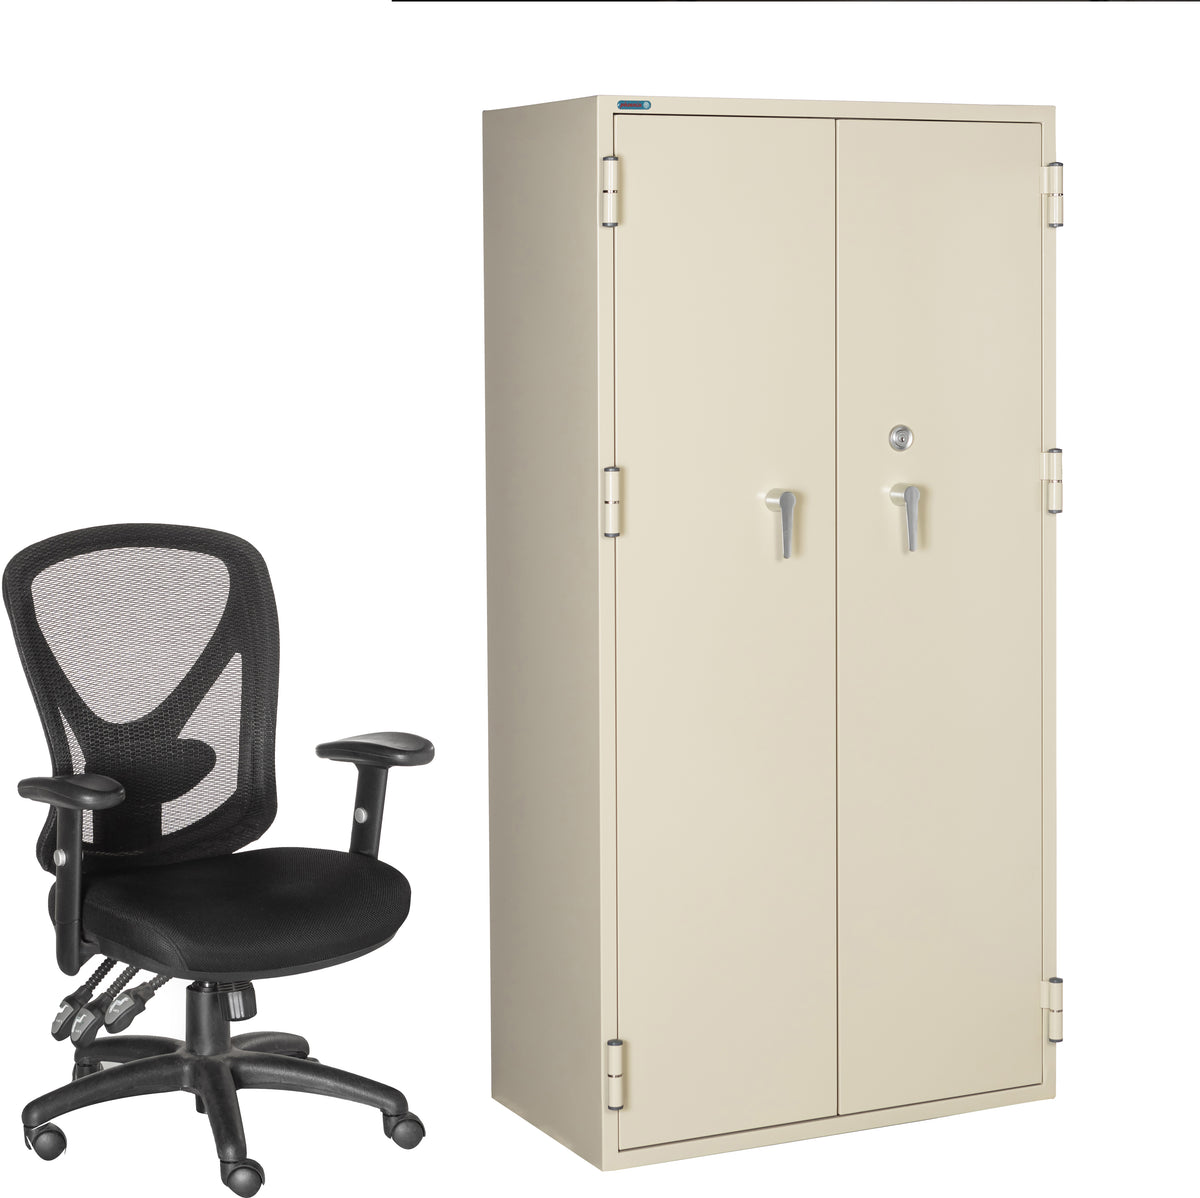 Phoenix FRSC72 Fire Fighter 90 Minute Fire Rated Storage Cabinet Next to Office Chair